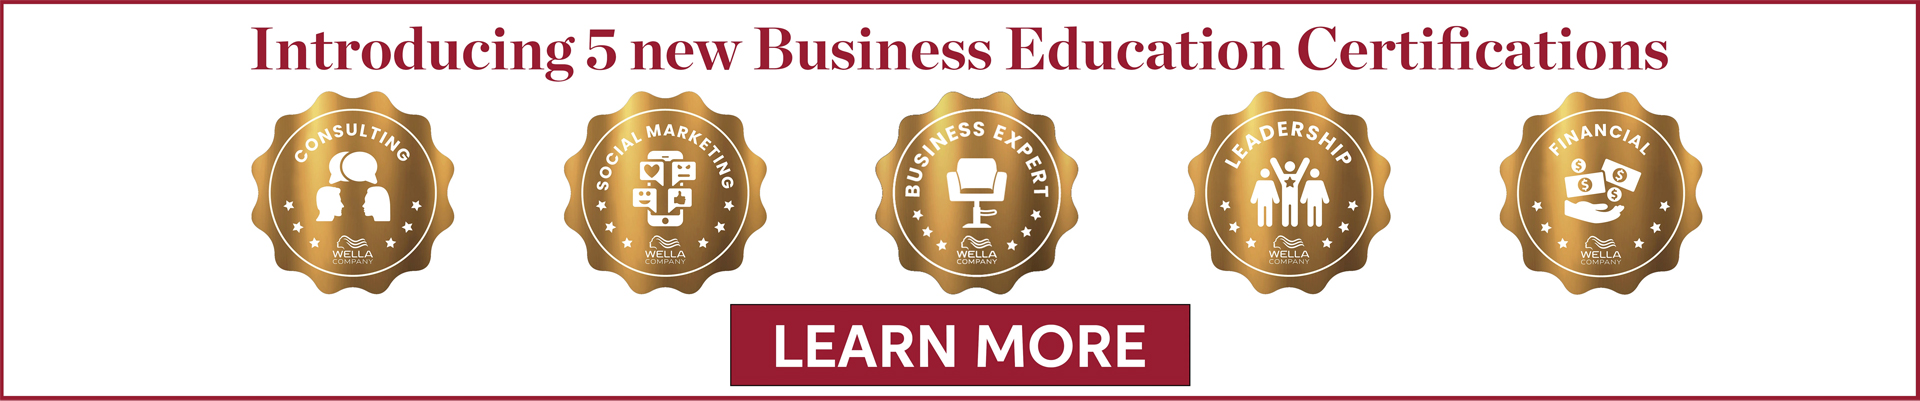 BUSINESS CERTIFICATIONS 